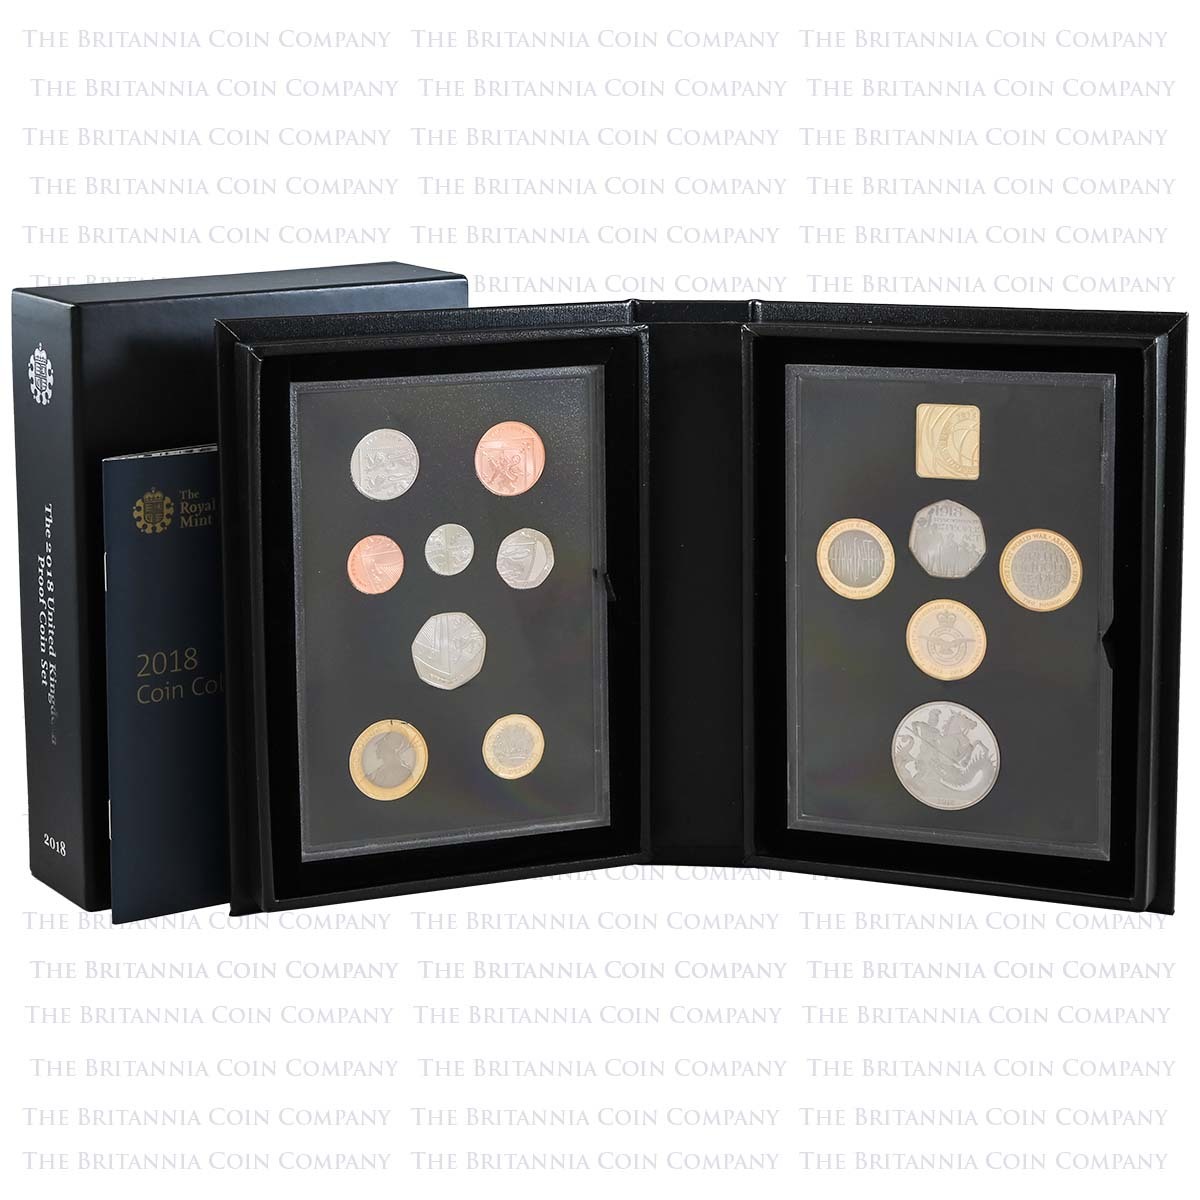 2018-proof-coin-set-collector-edtition-001-m